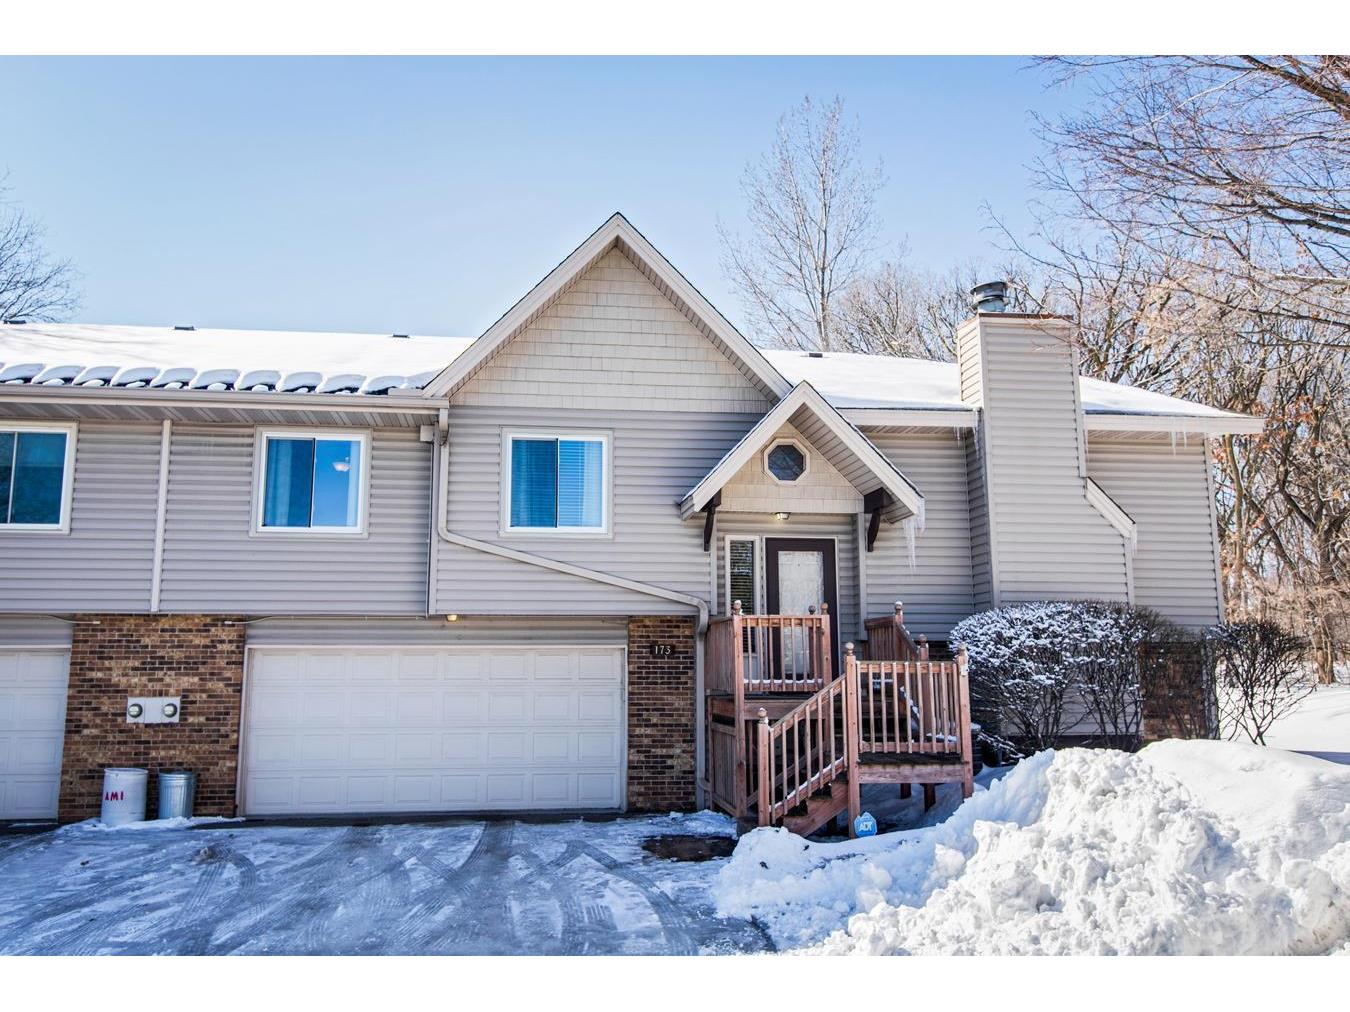 173 Galtier Place Shoreview MN 55126 6159409 image1